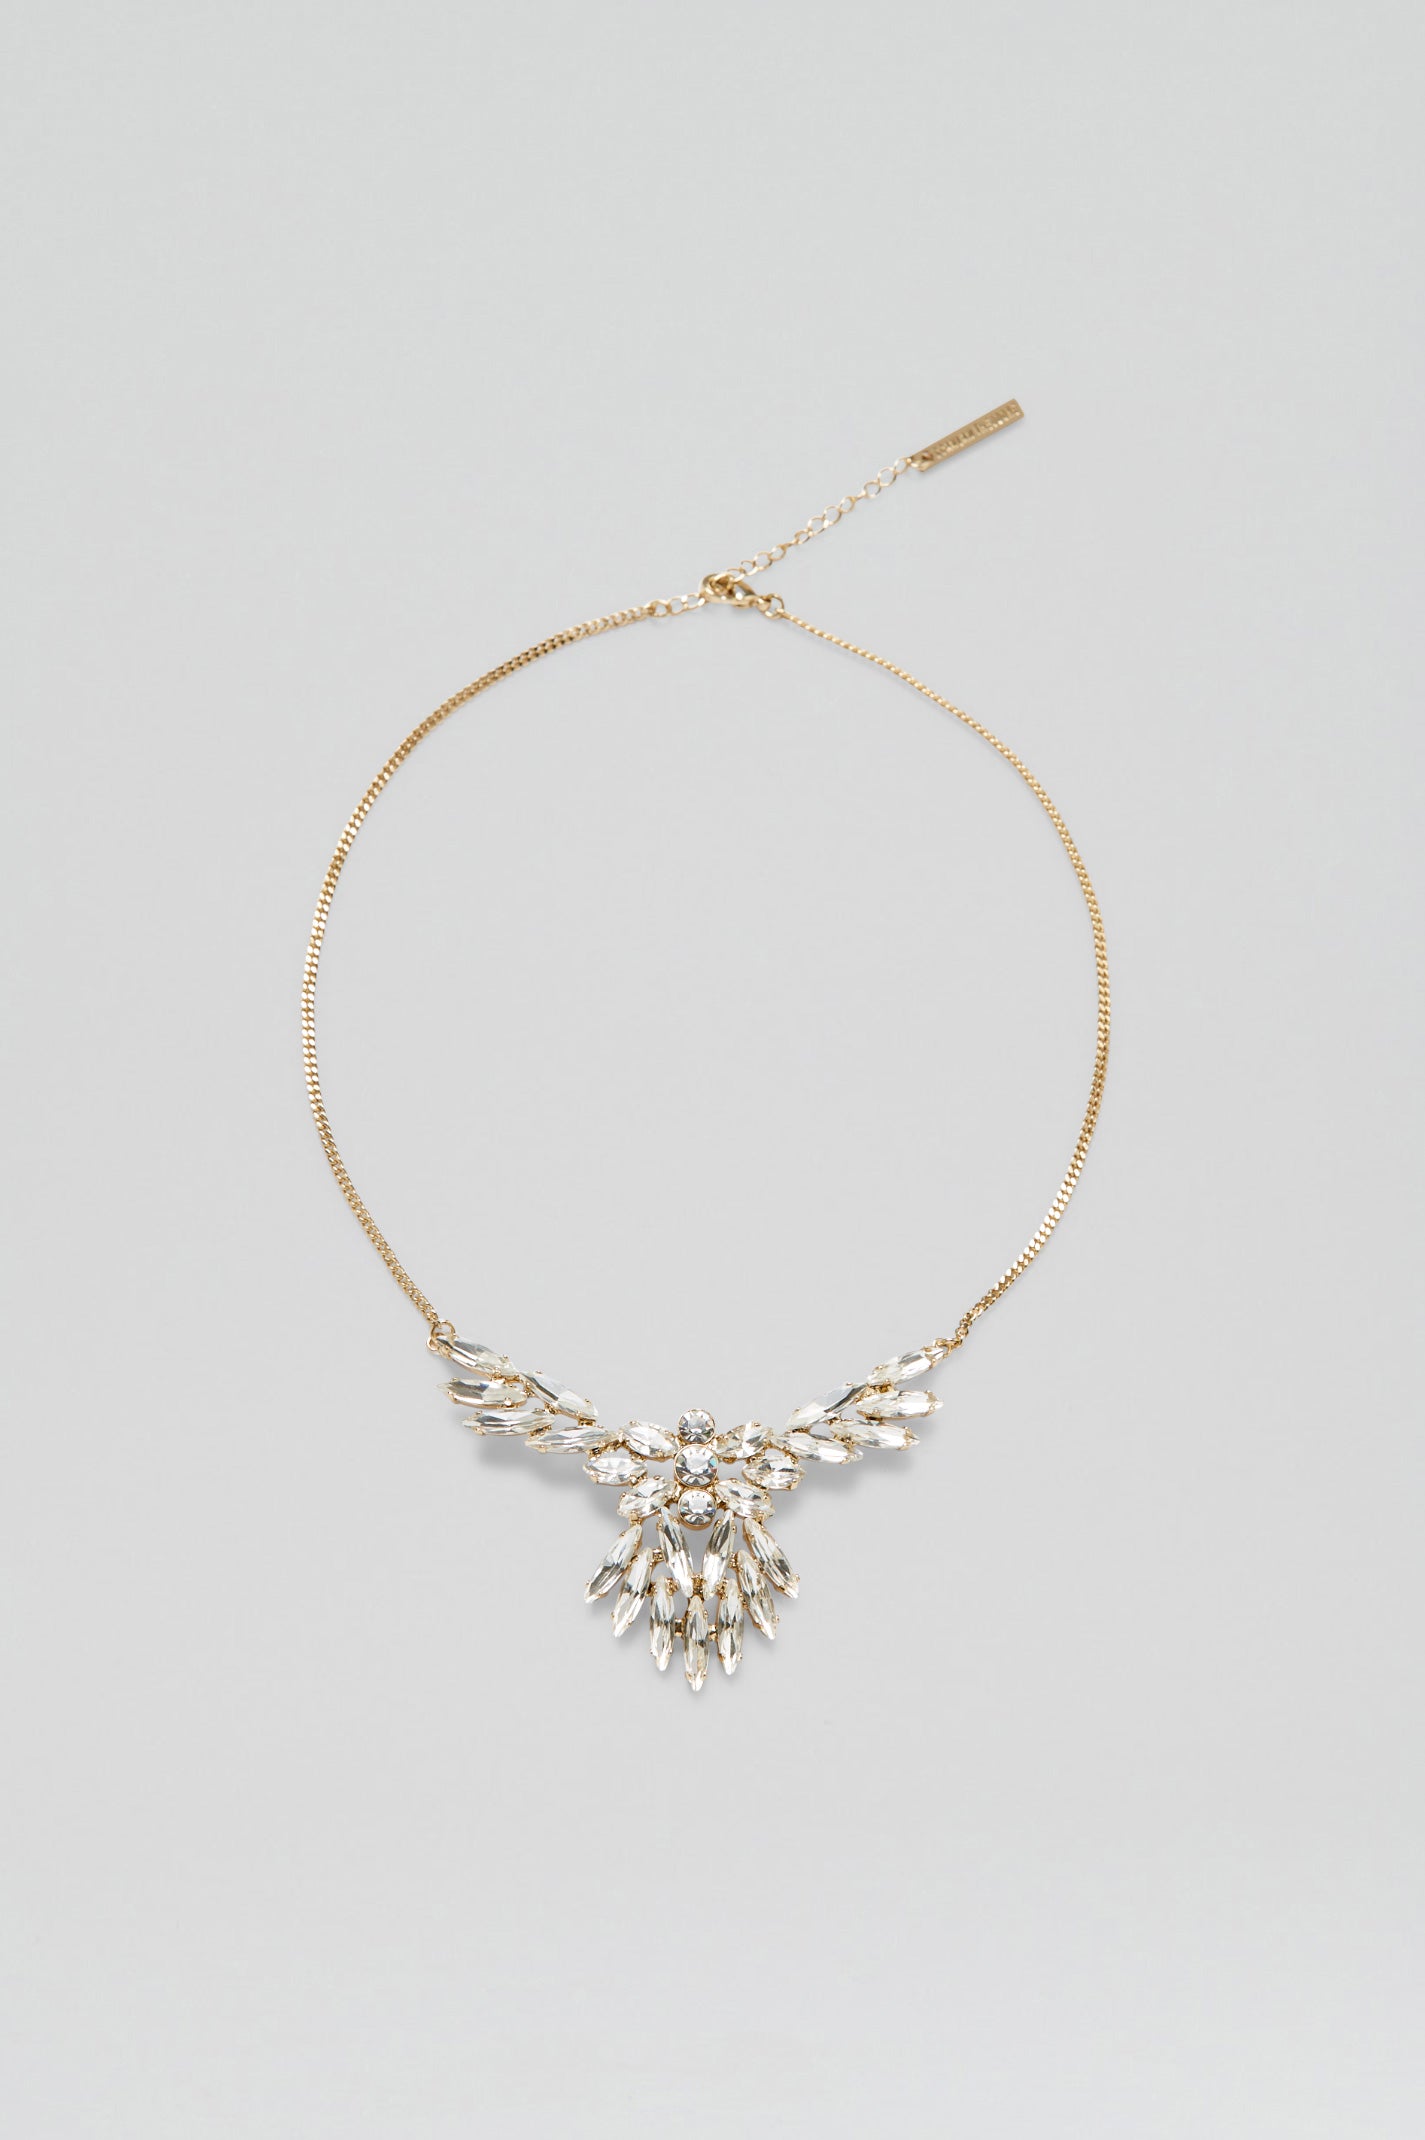 Statement necklaces: the wish list | Fashion | The Guardian